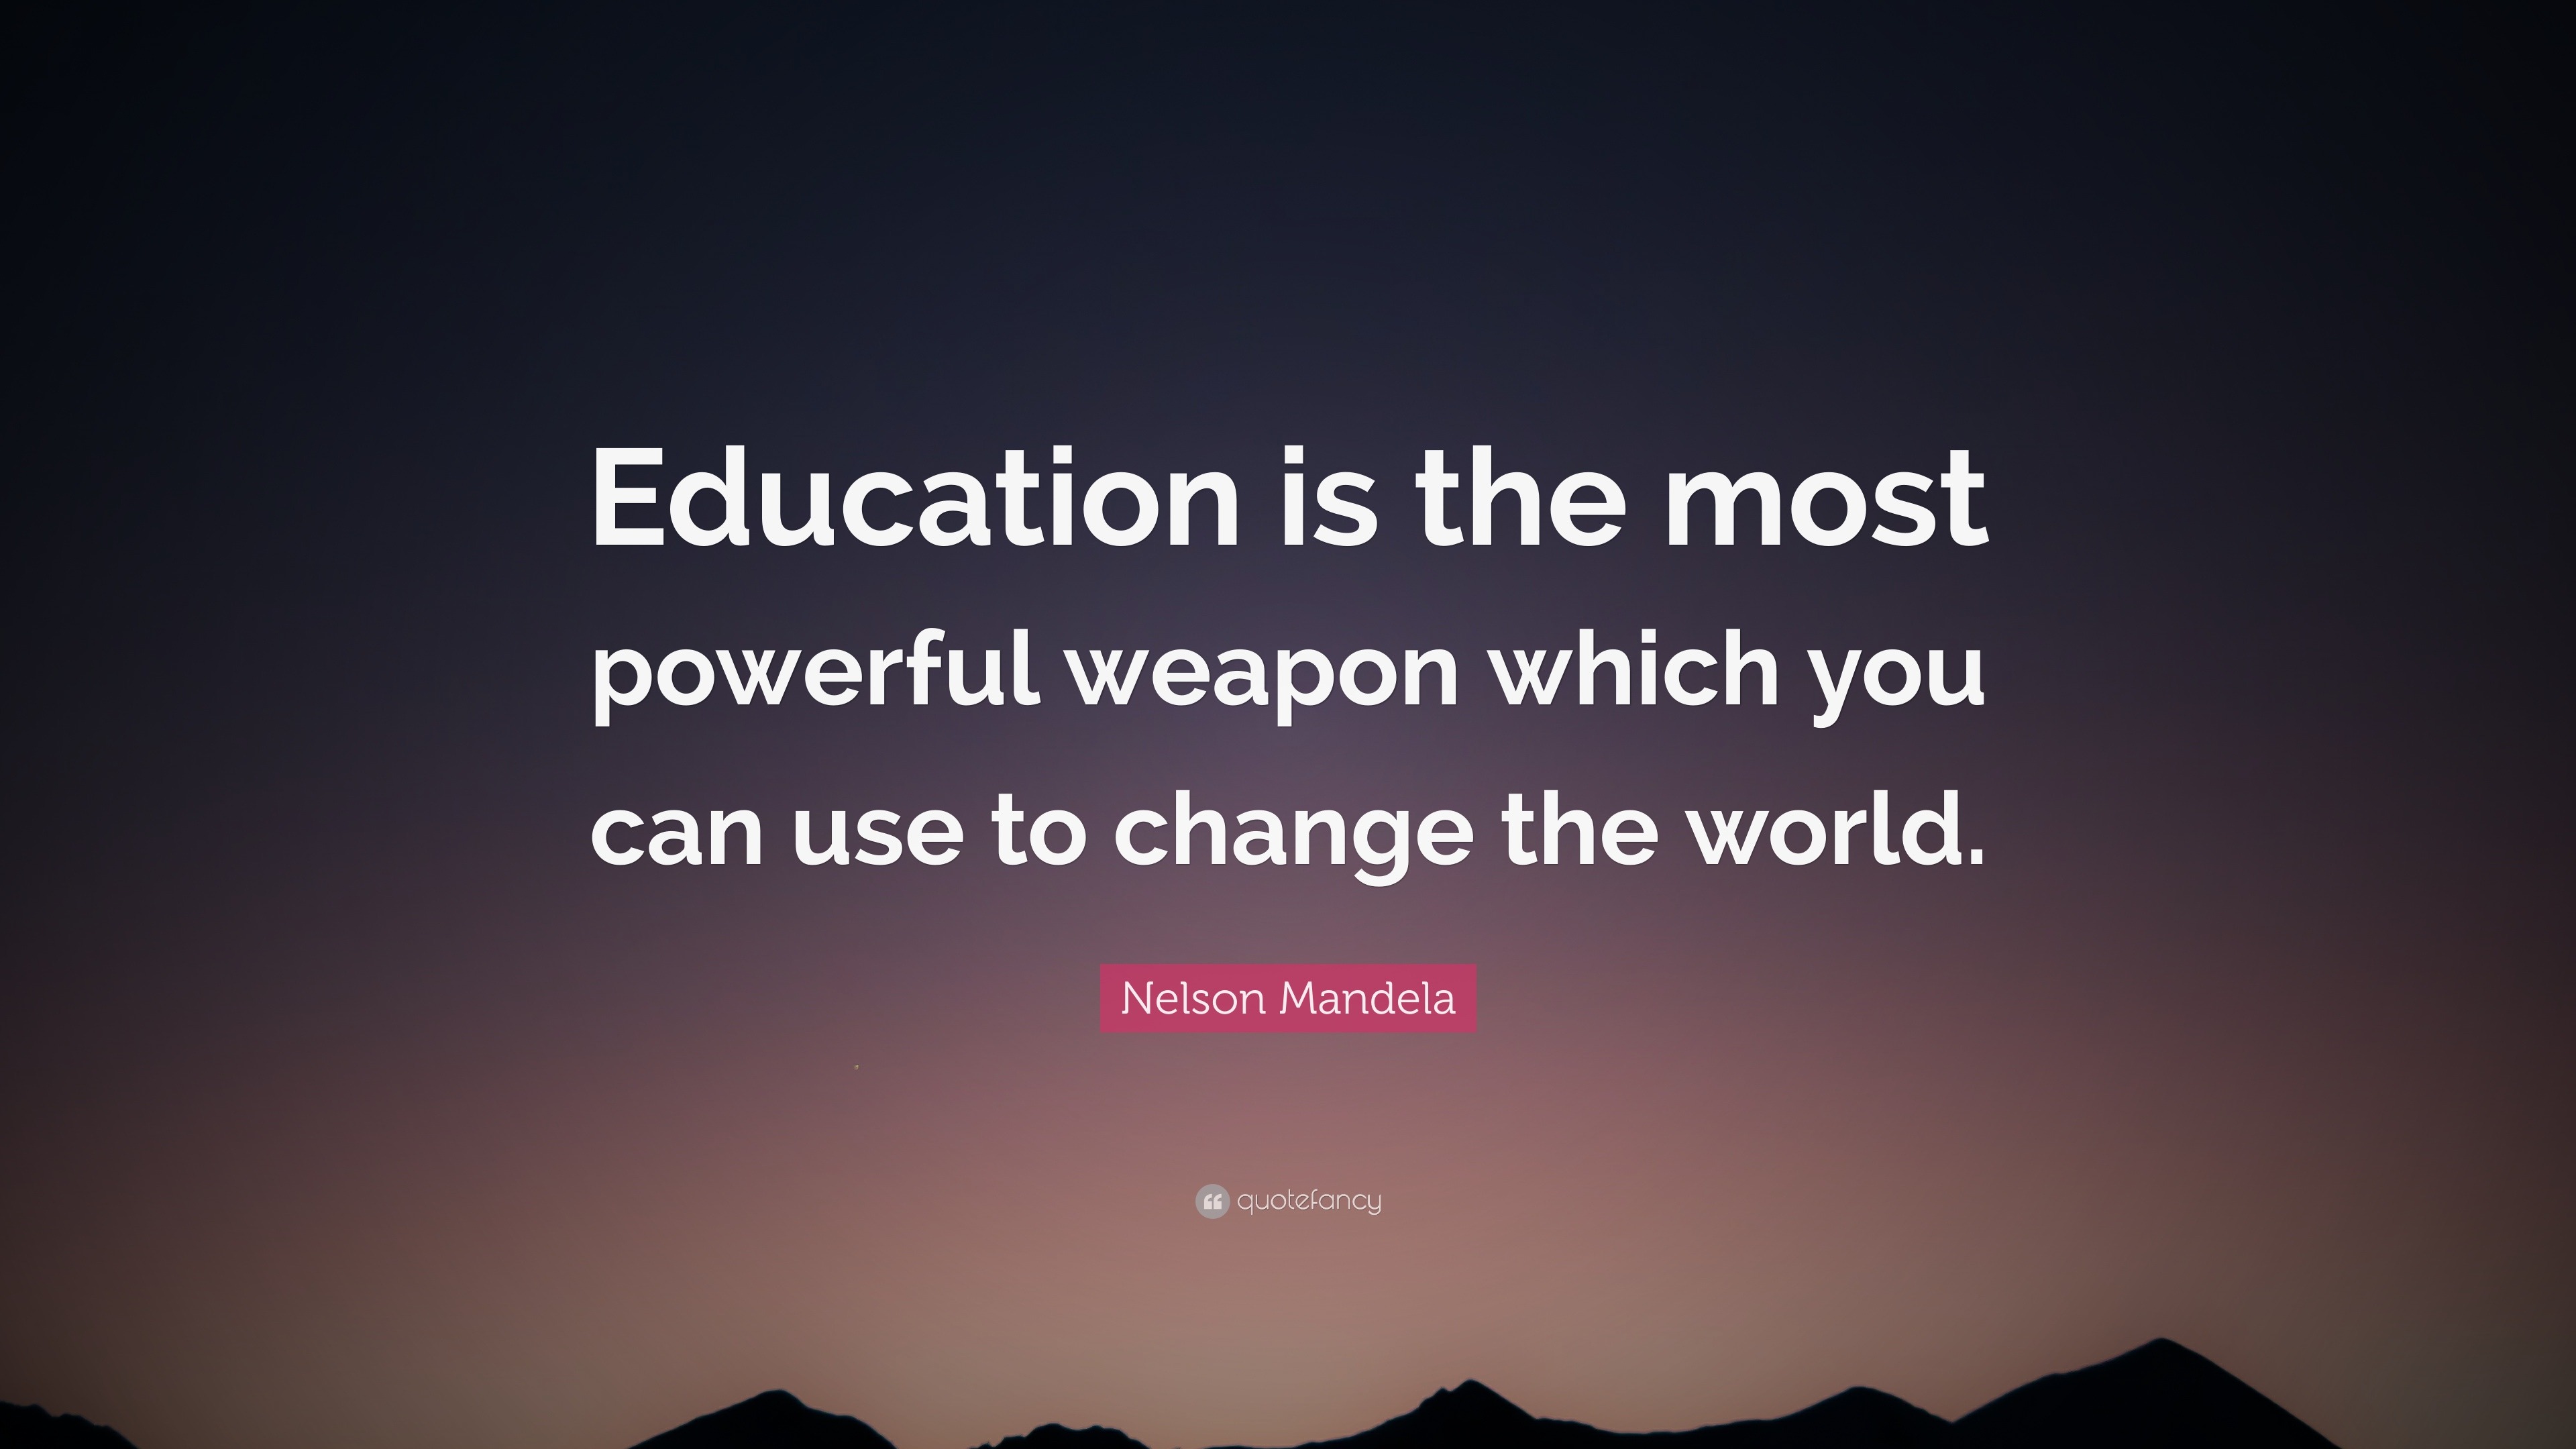 education is powerful weapon essay